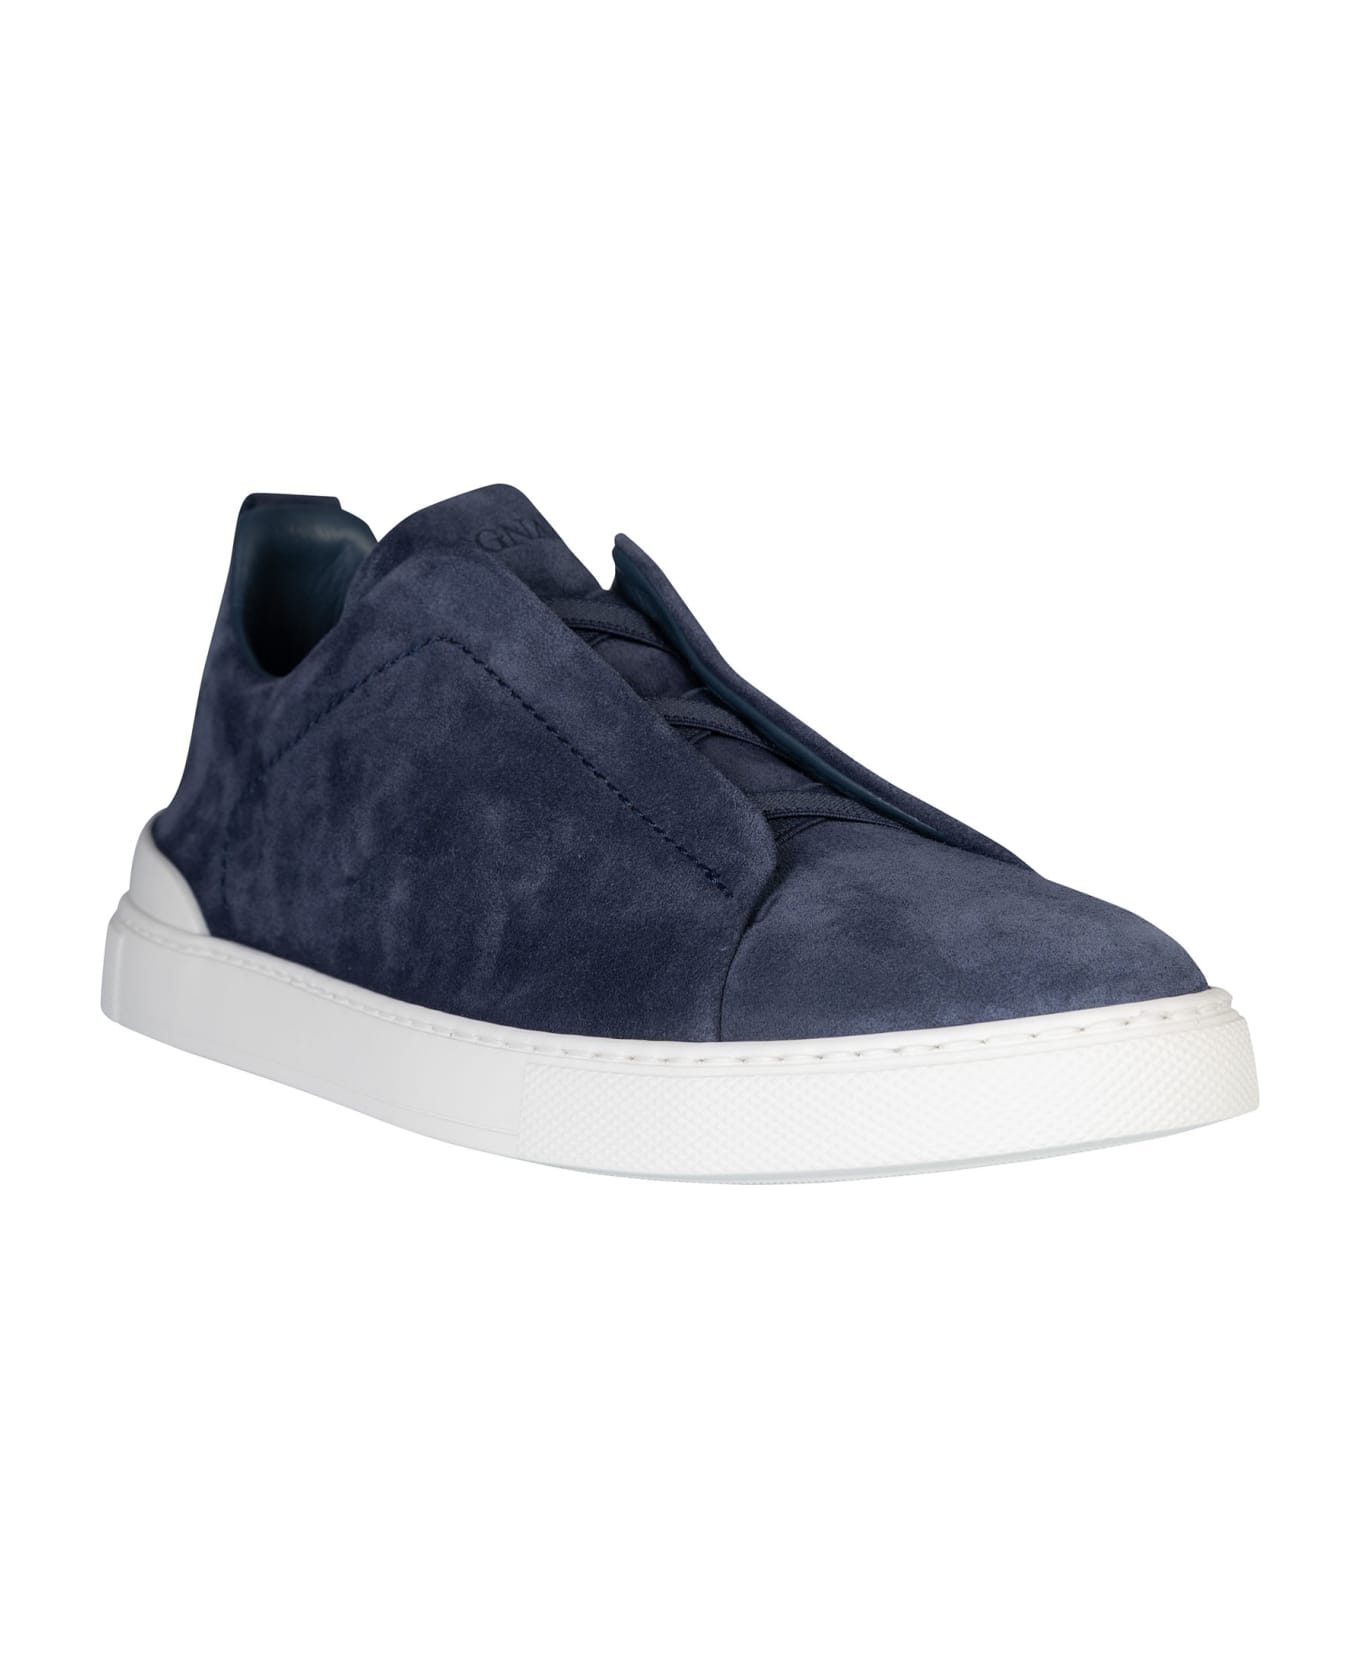 Zegna Triple Stretch Low Top Sneakers